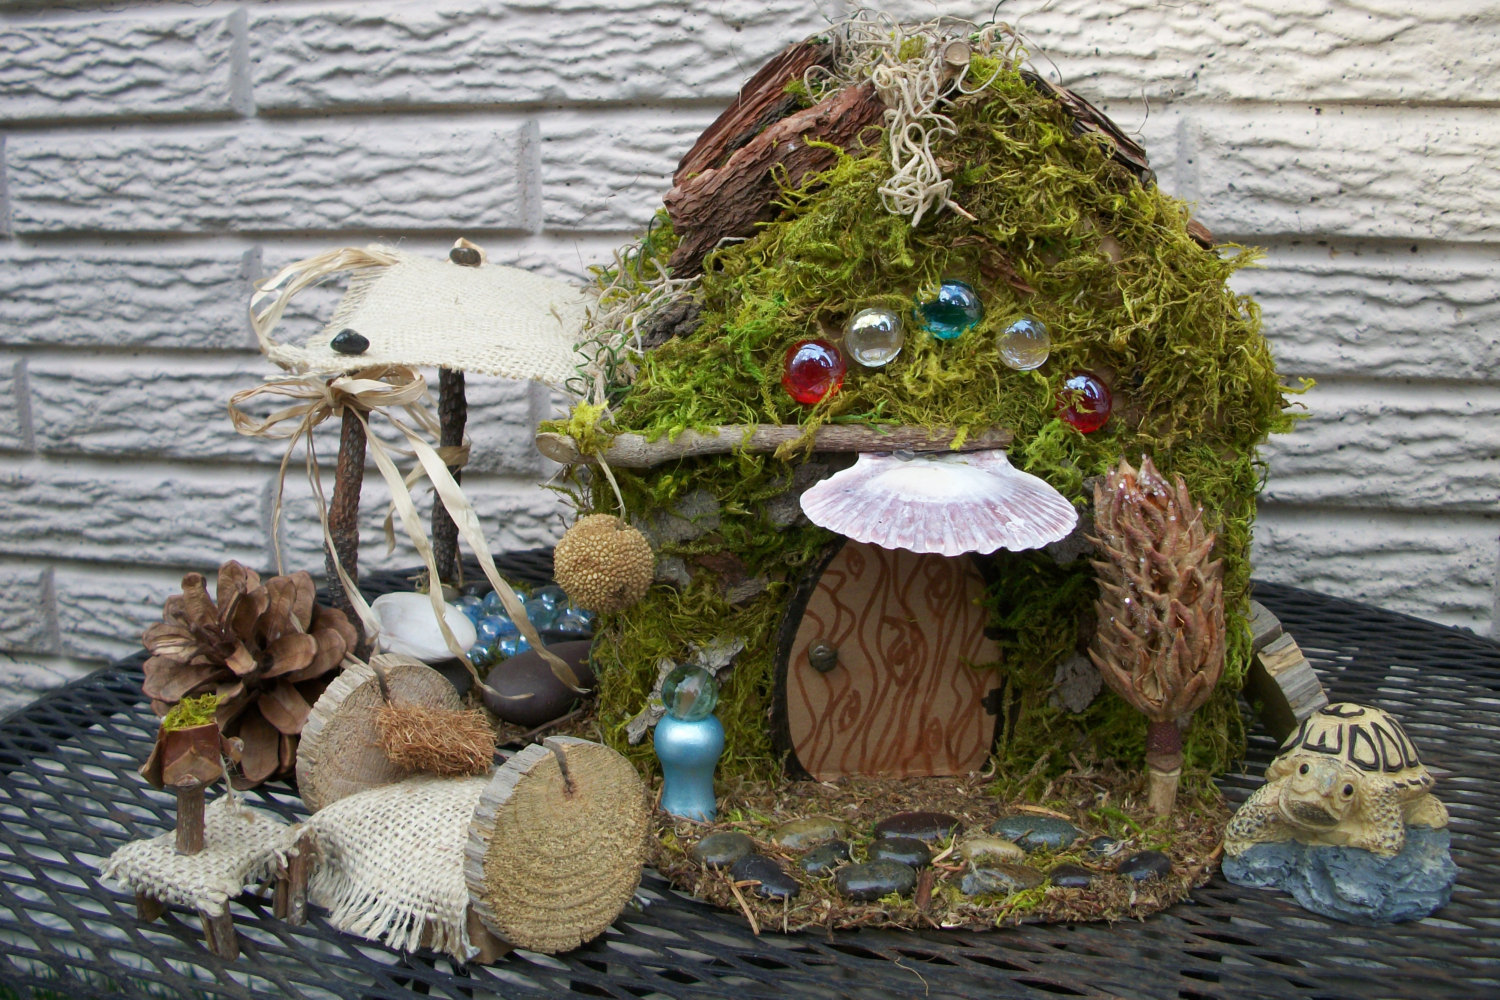 DIY Fairy House Ideas To Bring Magic In Your Garden - Page 2 of 2